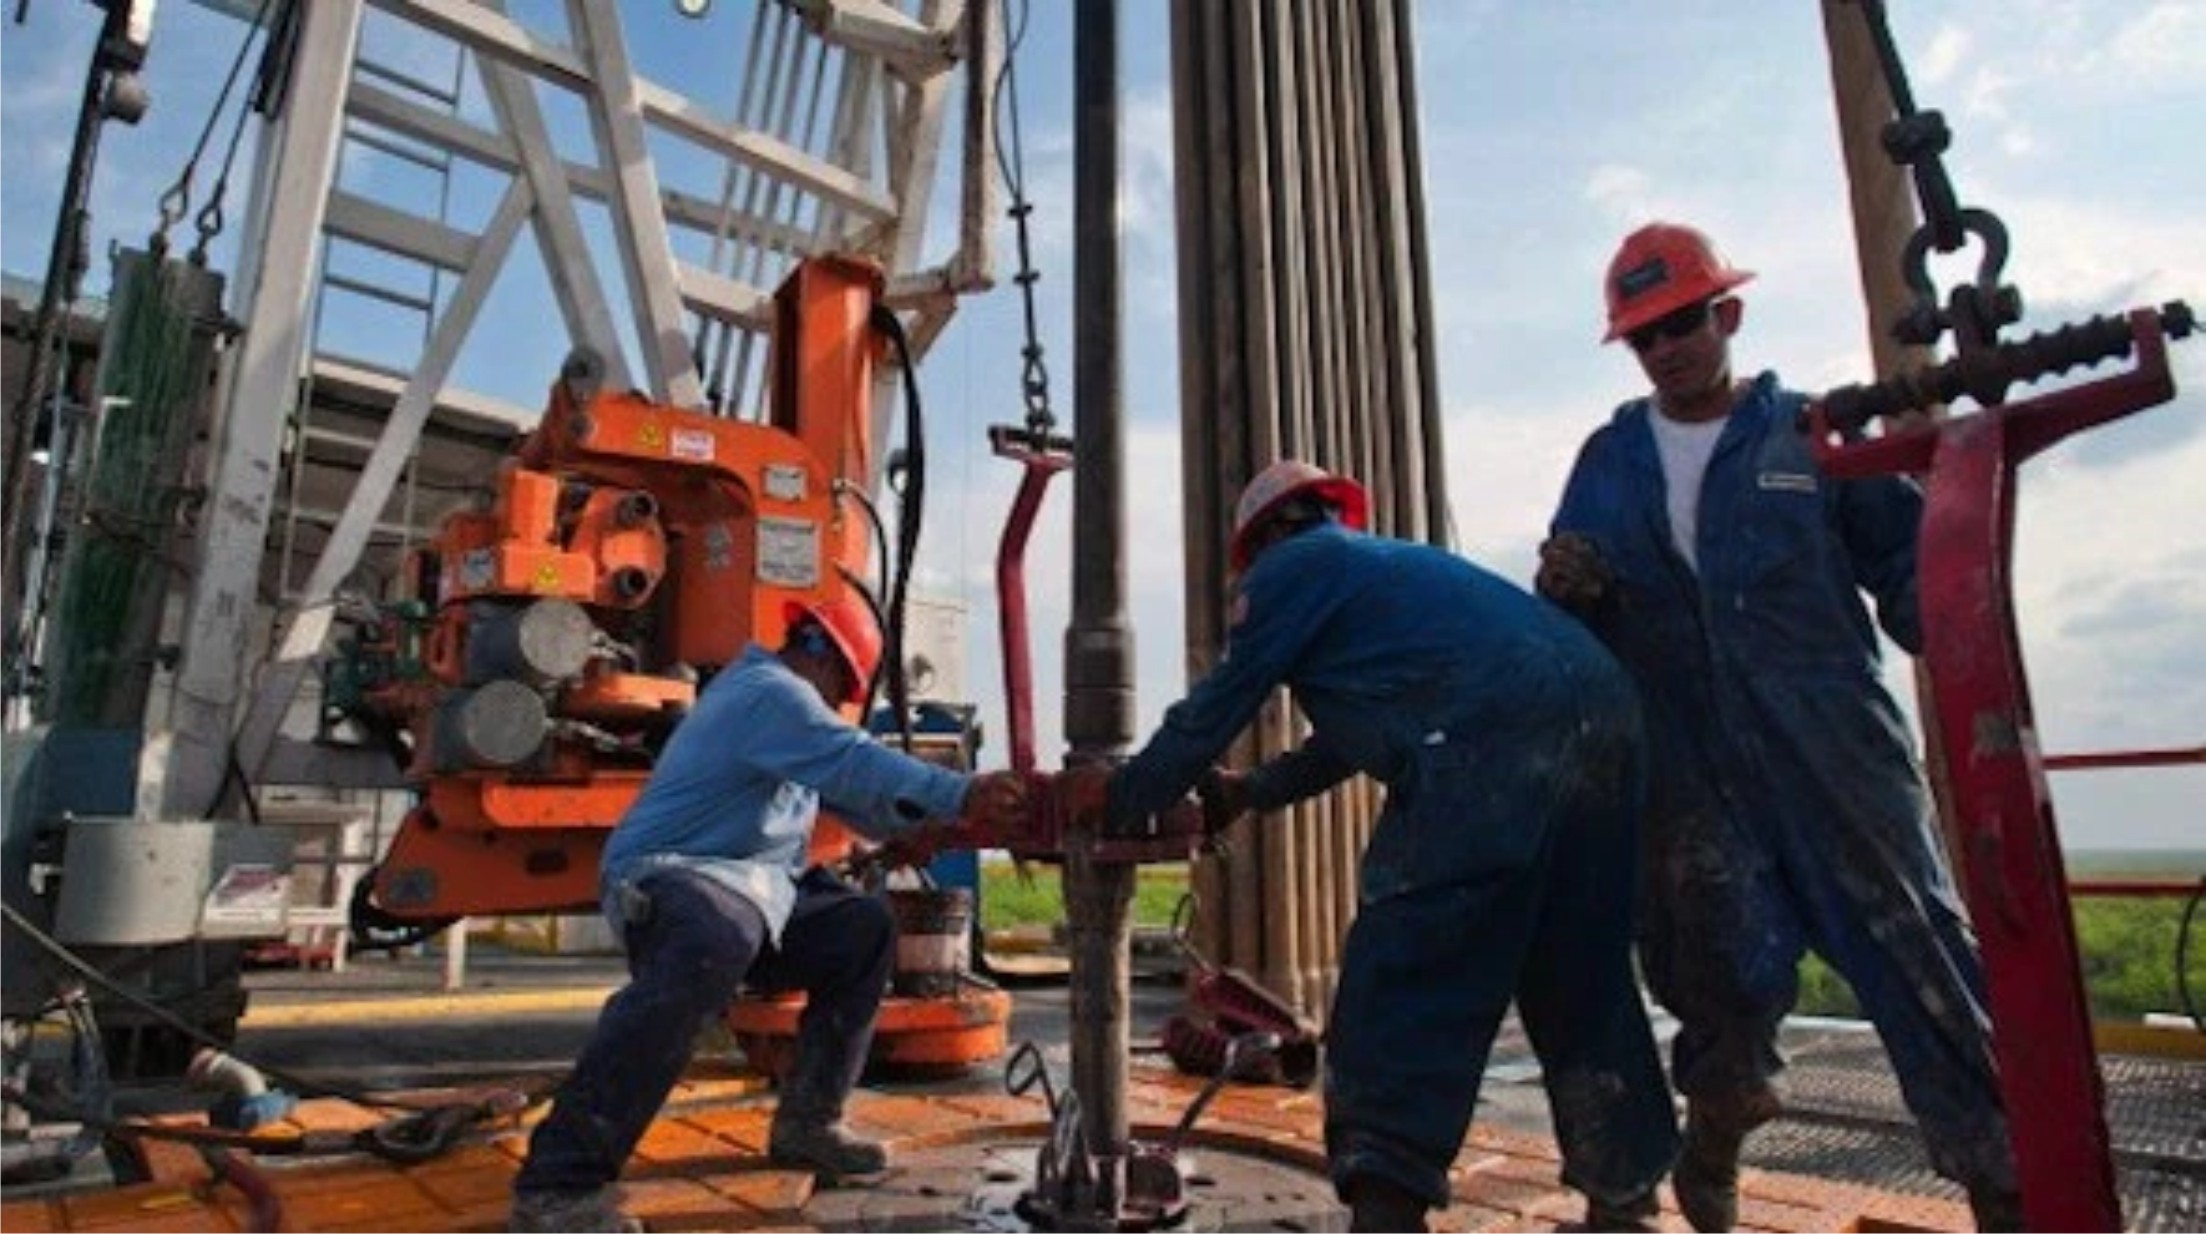 Nigeria’s crude oil production for February falls to 1.32 million b/d – OPEC